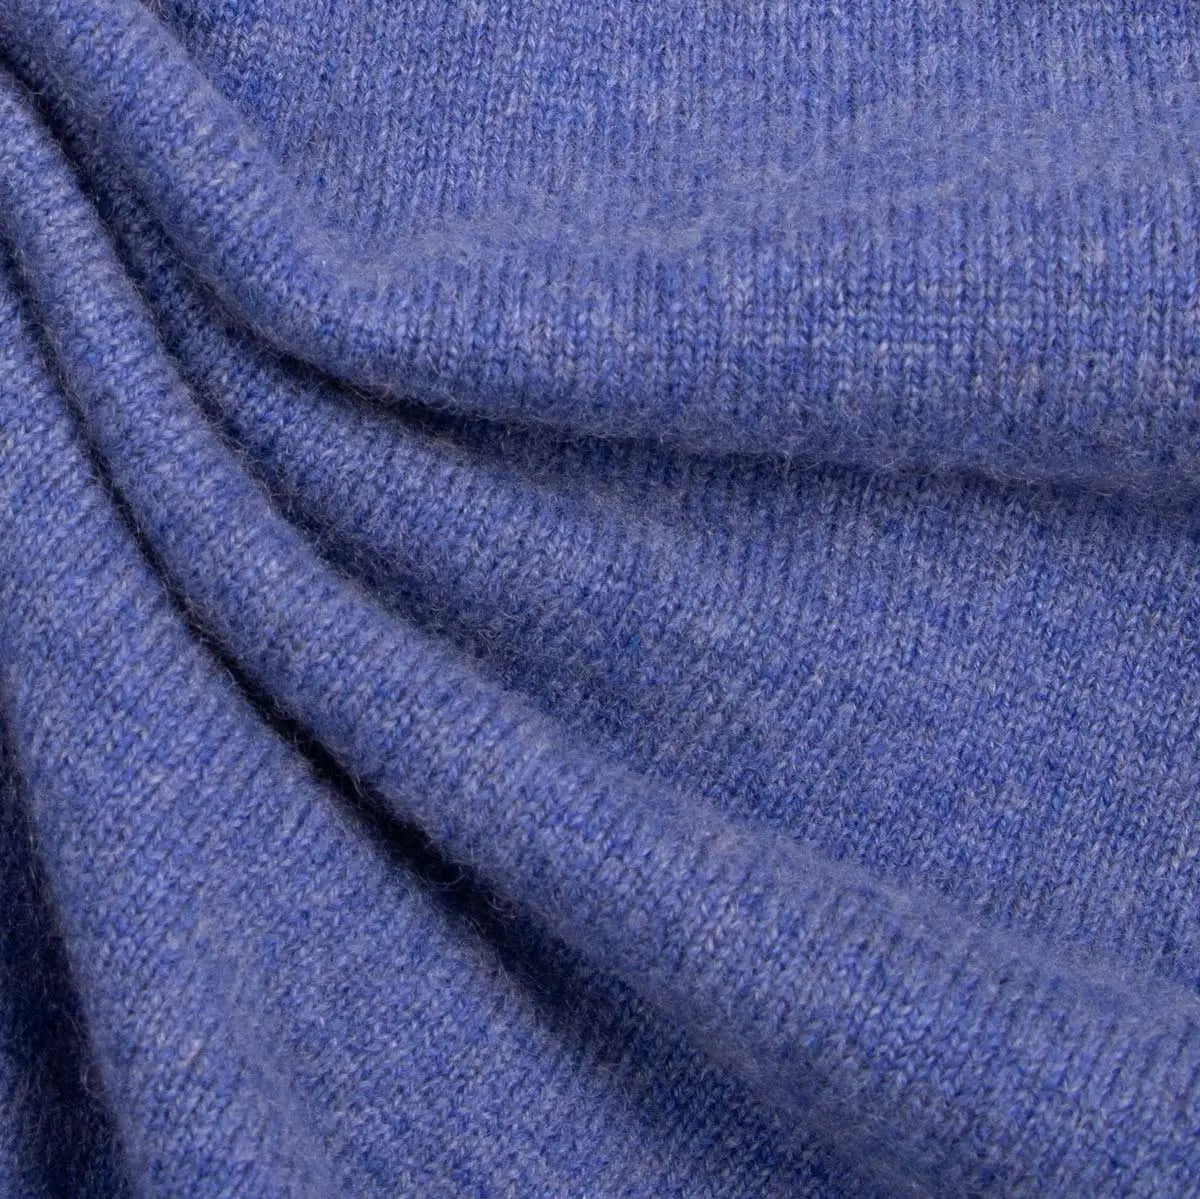 Lapis Blue Chatsworth 2ply V-Neck Cashmere Sweater Robert Old